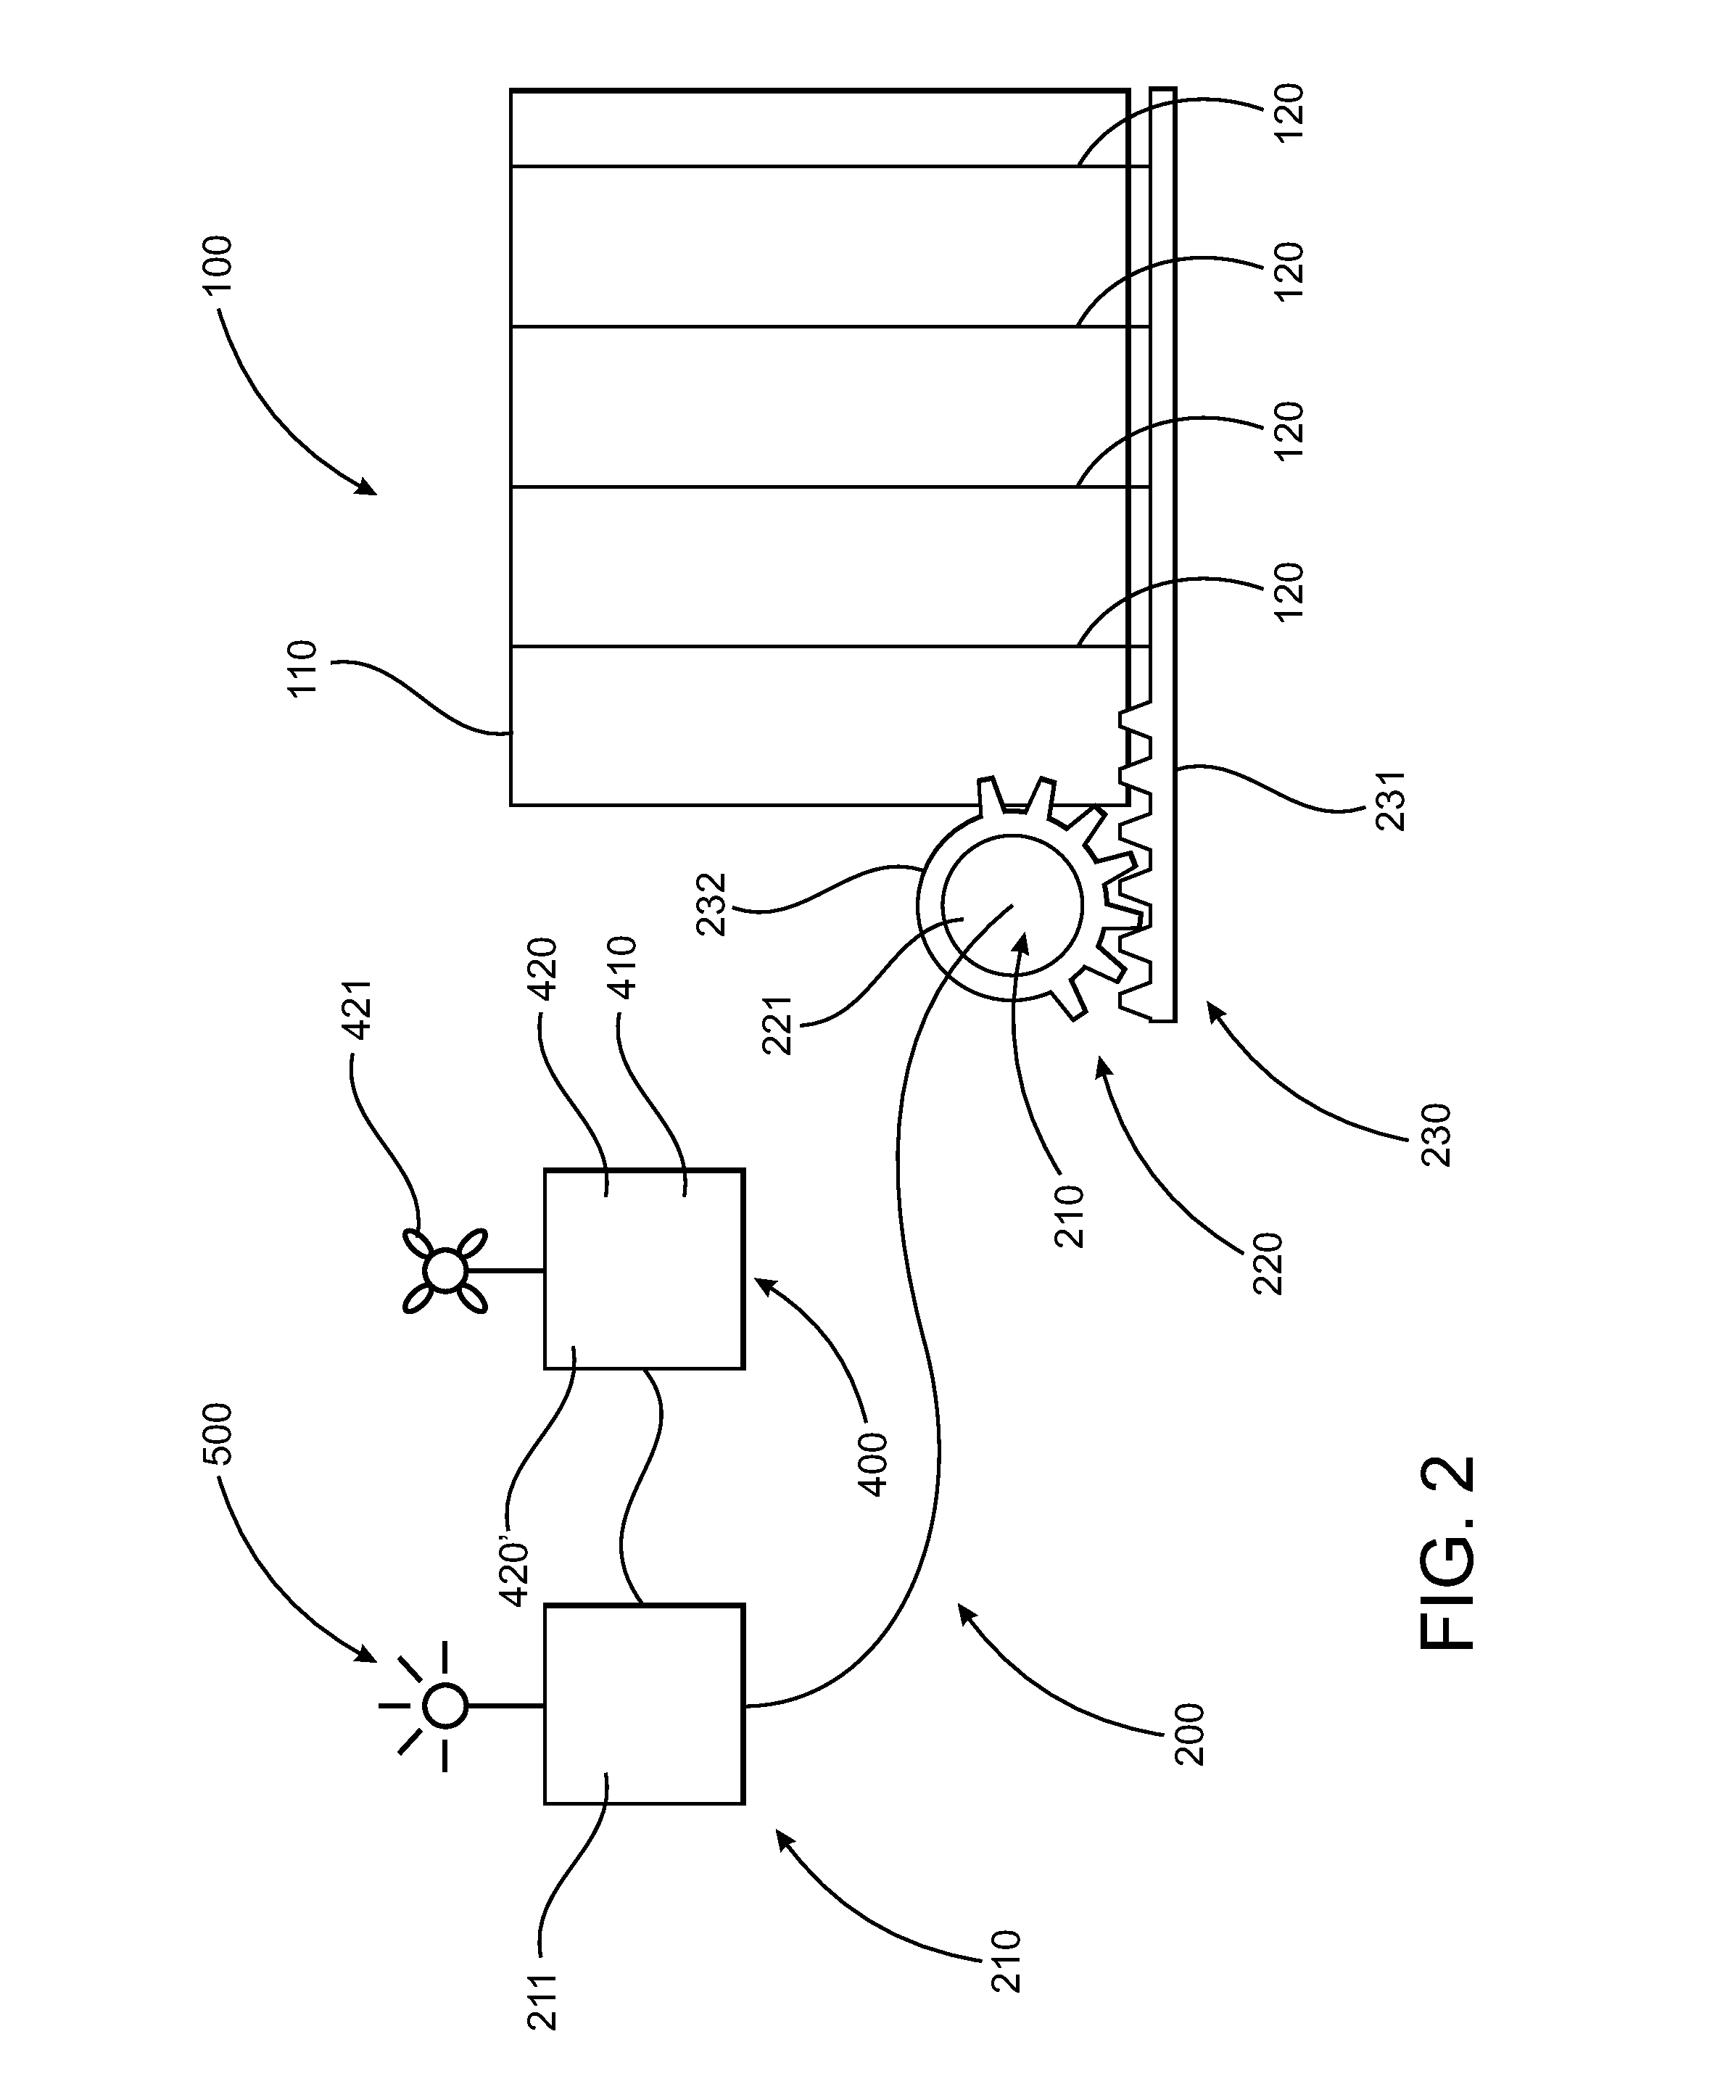 System for controlling ambient conditions within a given area with automated fluid register